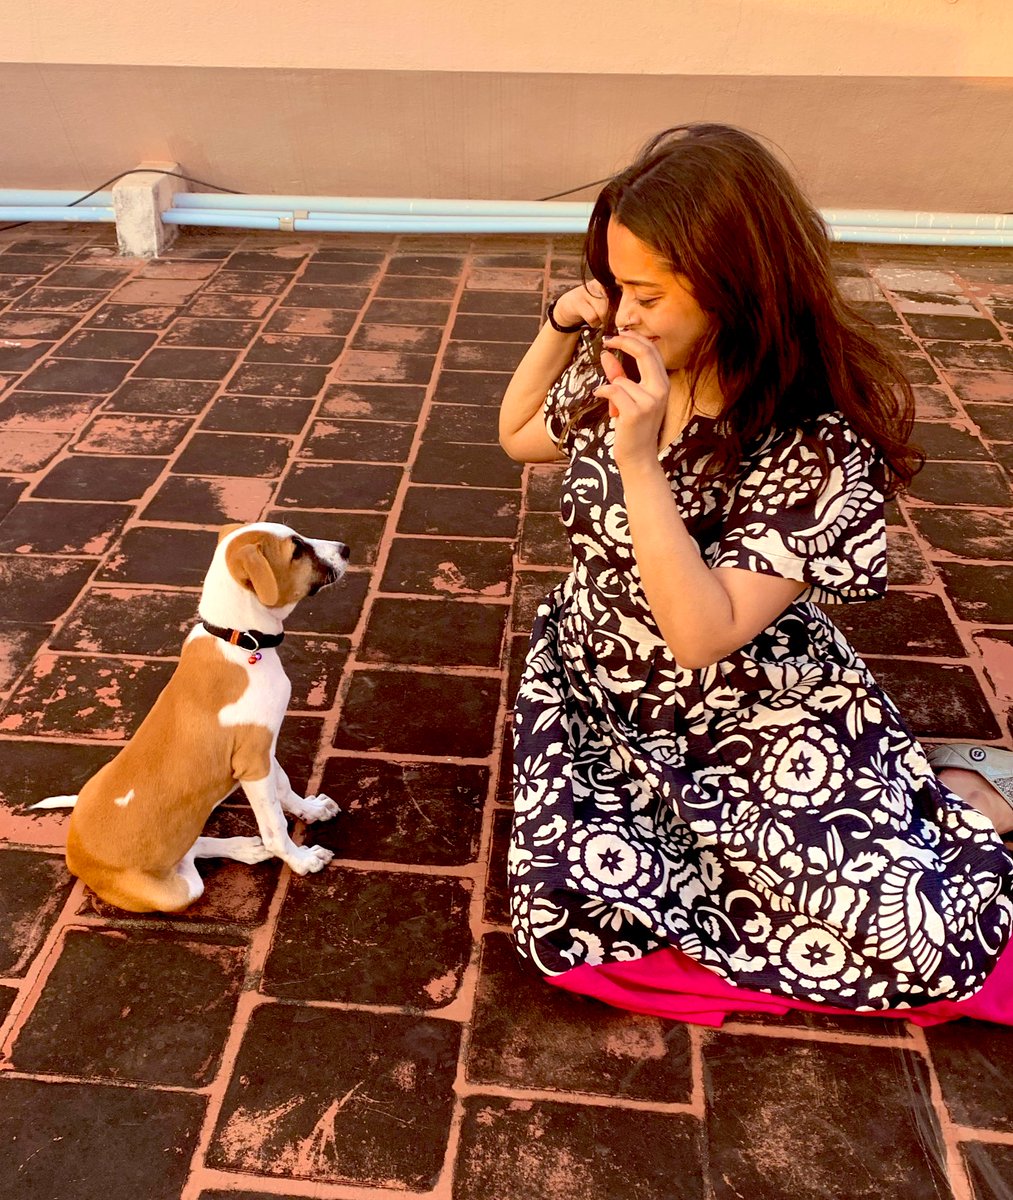 And here we are again! Our little Cookie is looking for a permanent home! She’s 3 months old, will complete vaccinations tomorrow and is on her way to being house trained. Please help her find a home 💜#ChennaiAdoption #AdoptDontShop #Indie #PuppyAdoption